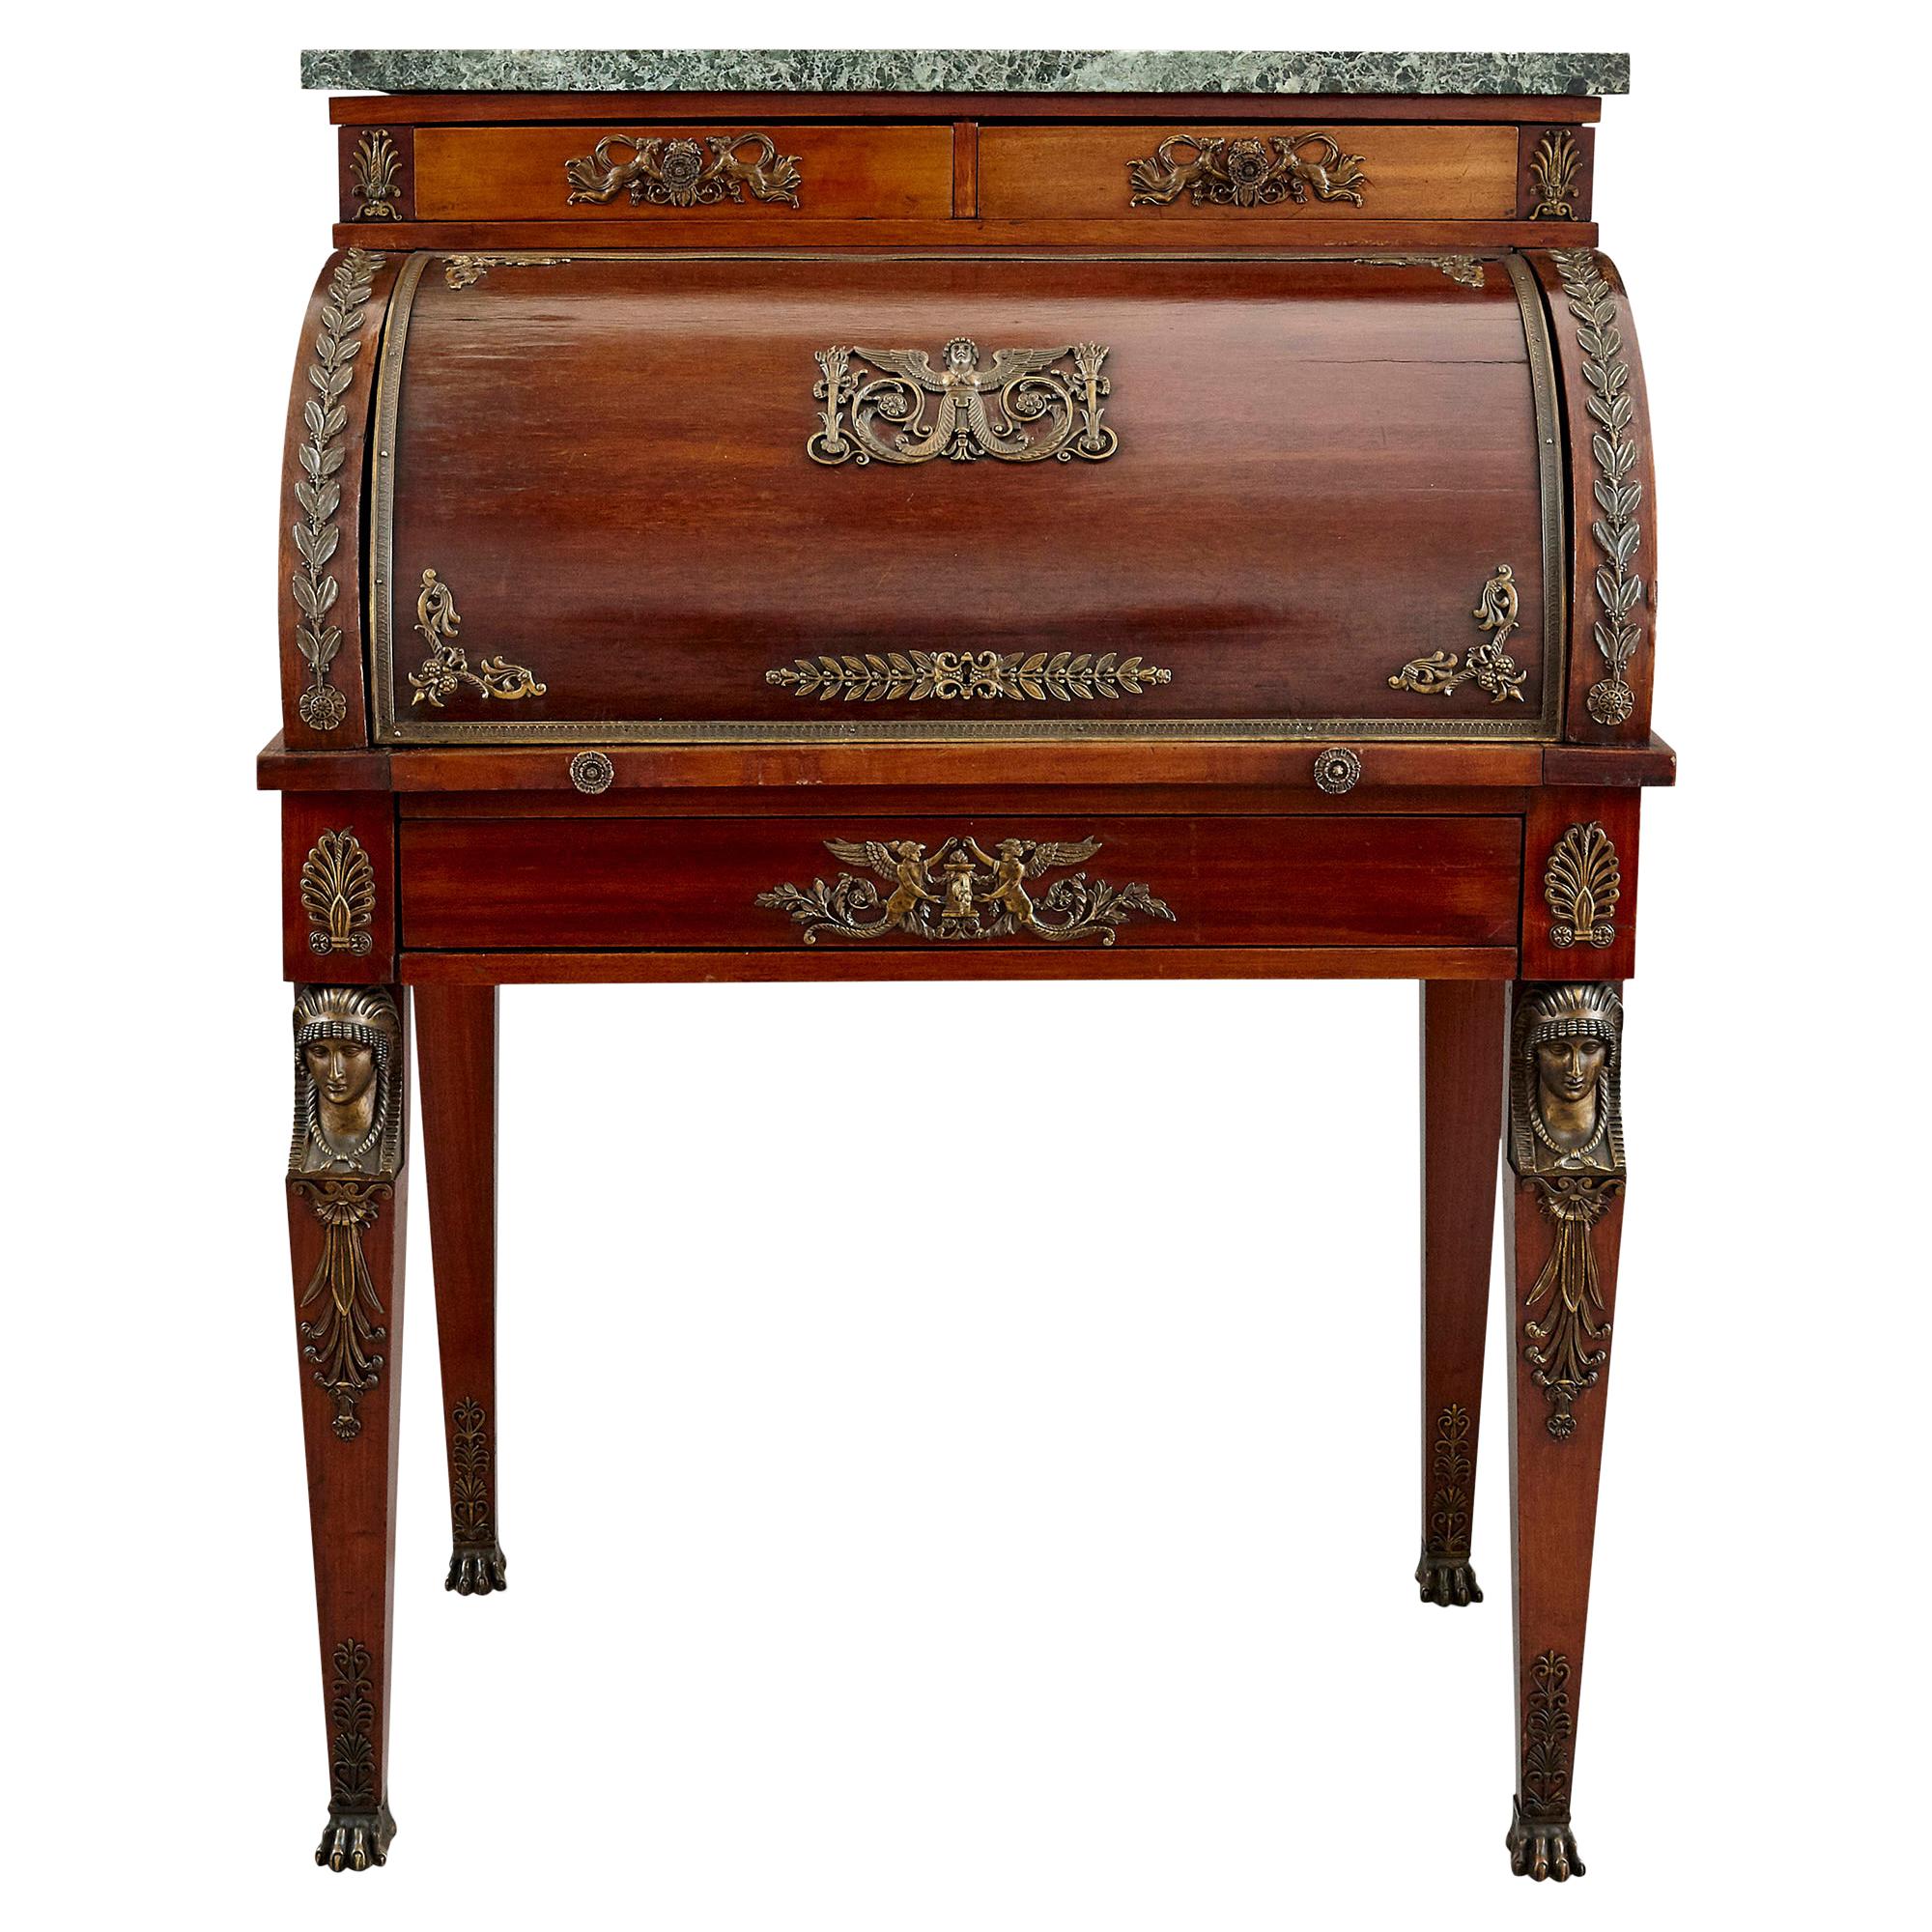 Early 20th Century French Empire Style Roll-Top Desk For Sale